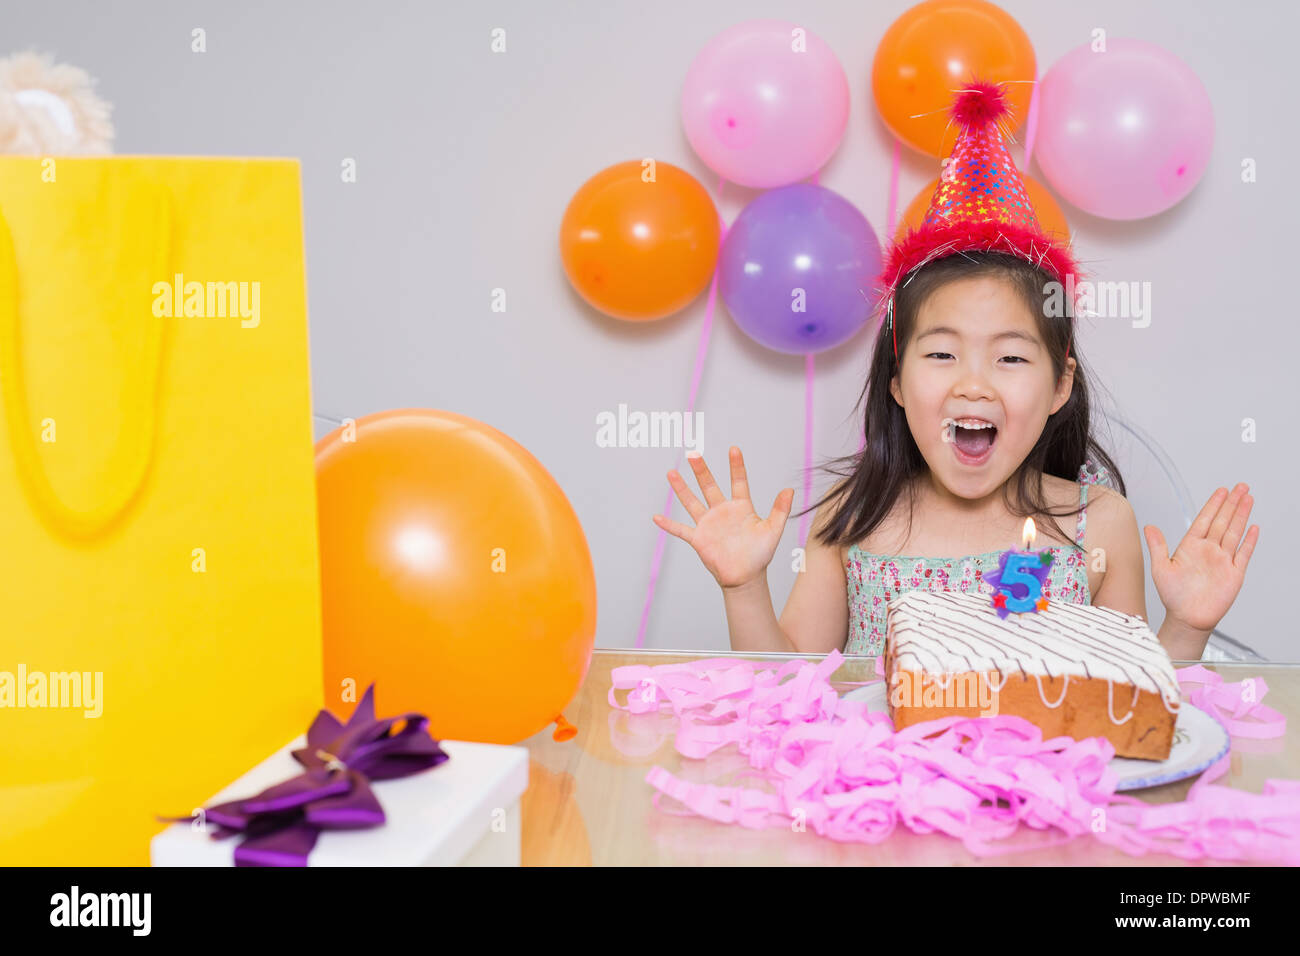 Cheerful little girl at her birthday party Stock Photo